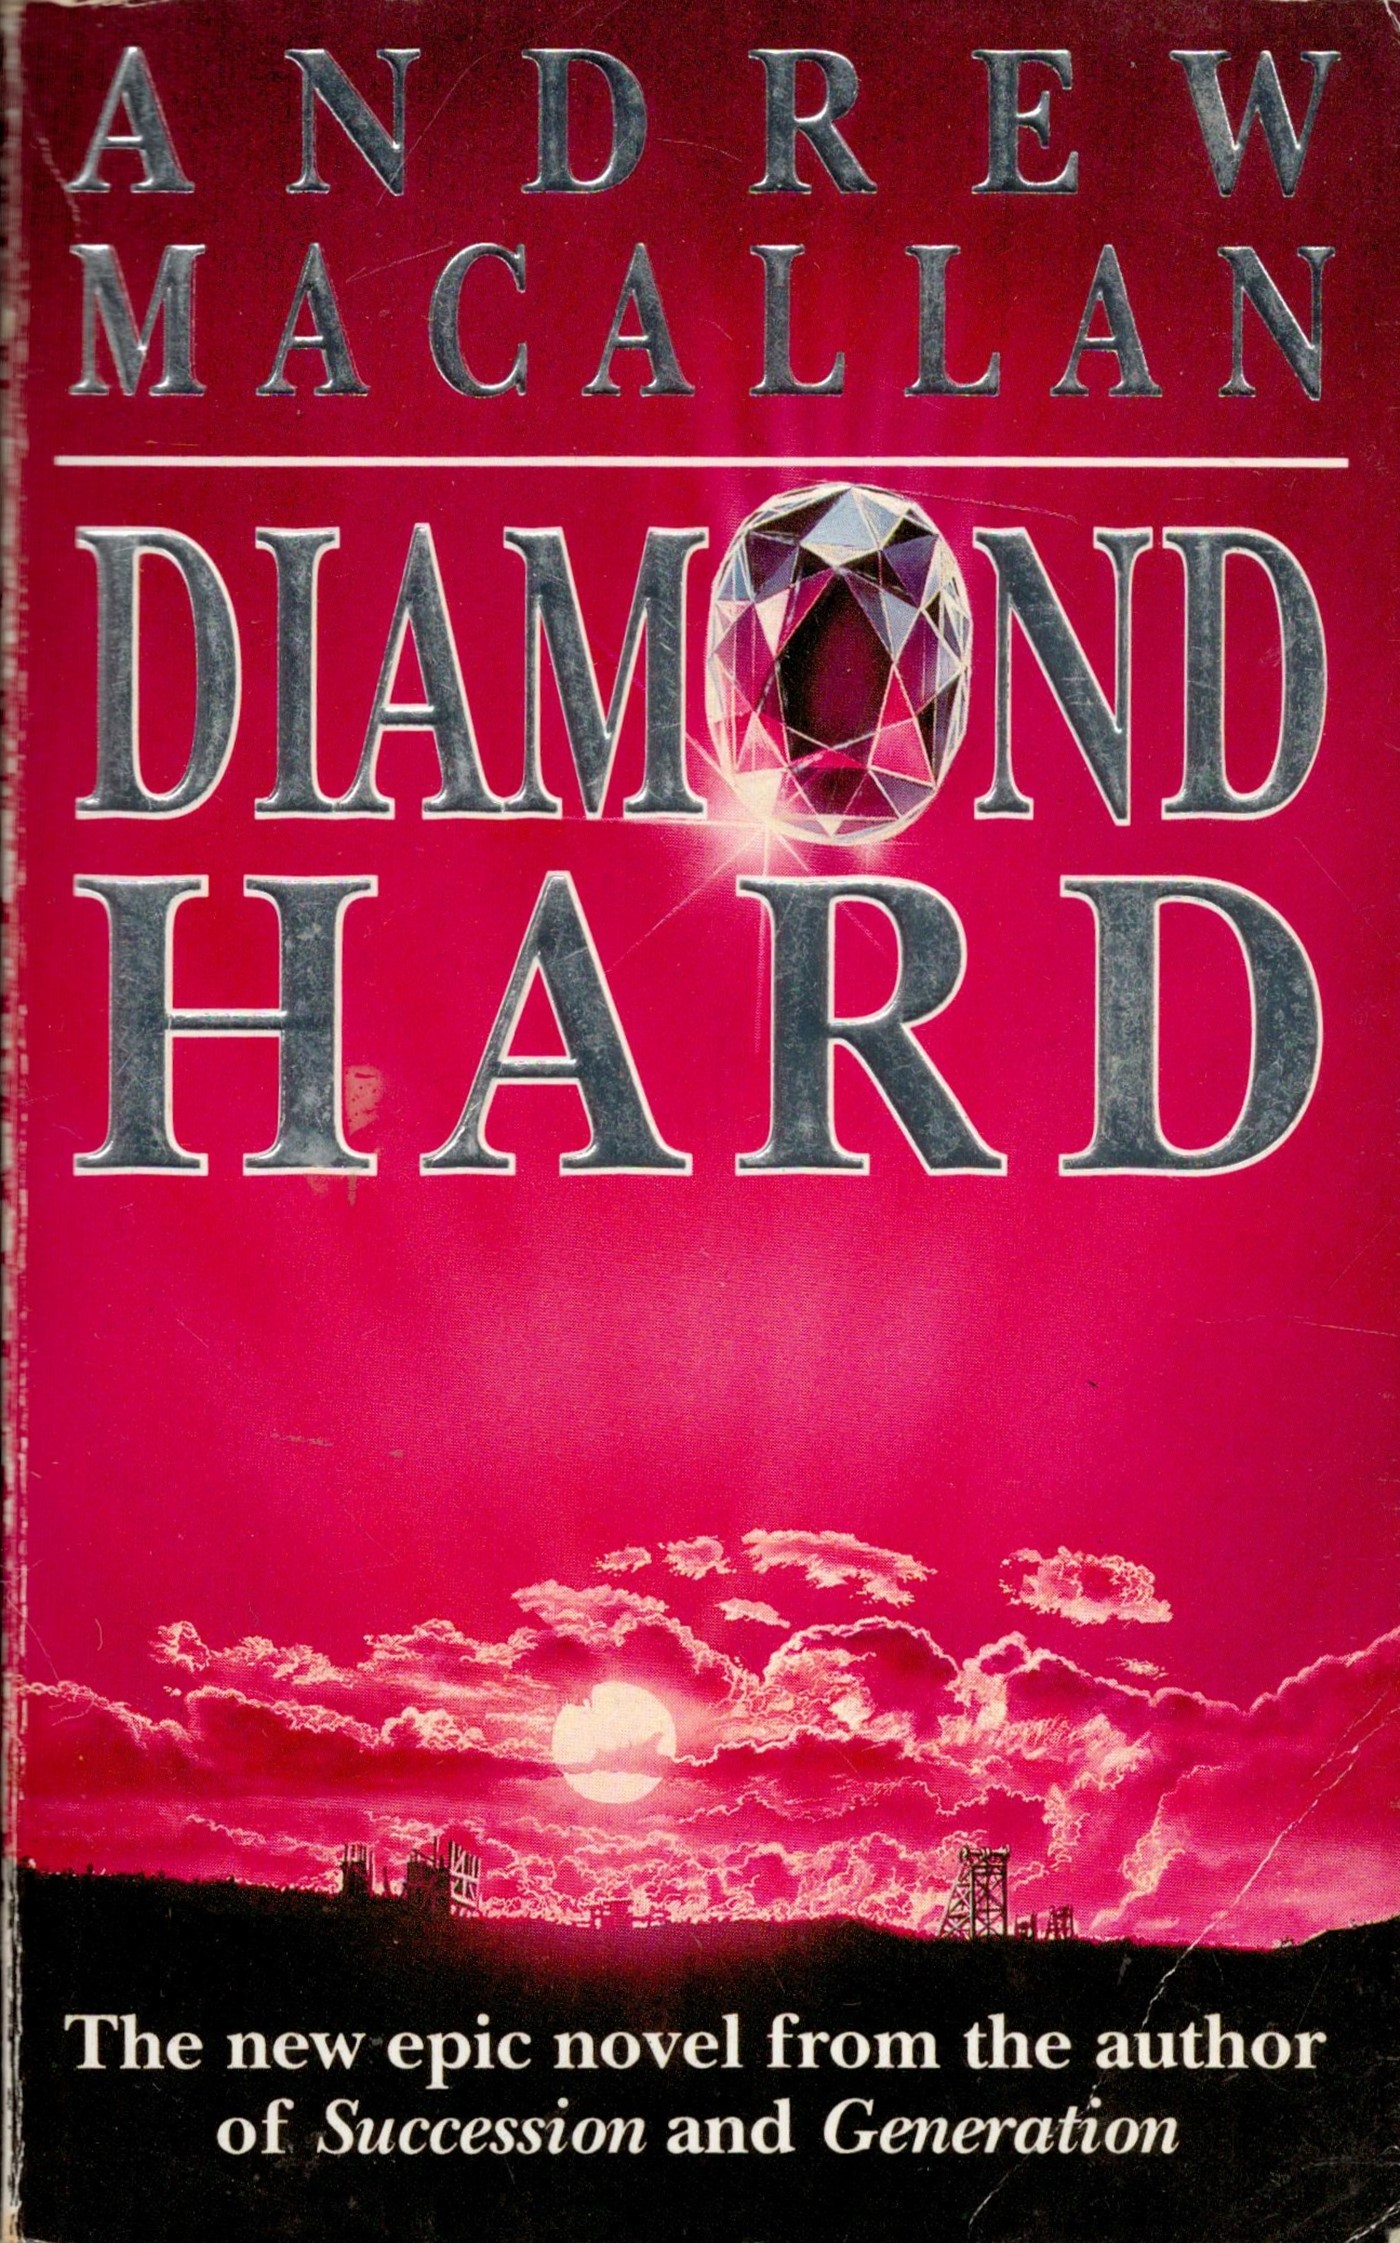 Signed Book Andrew Macallan Diamond Hard Softback Book 1991 First Edition Signed by Andrew